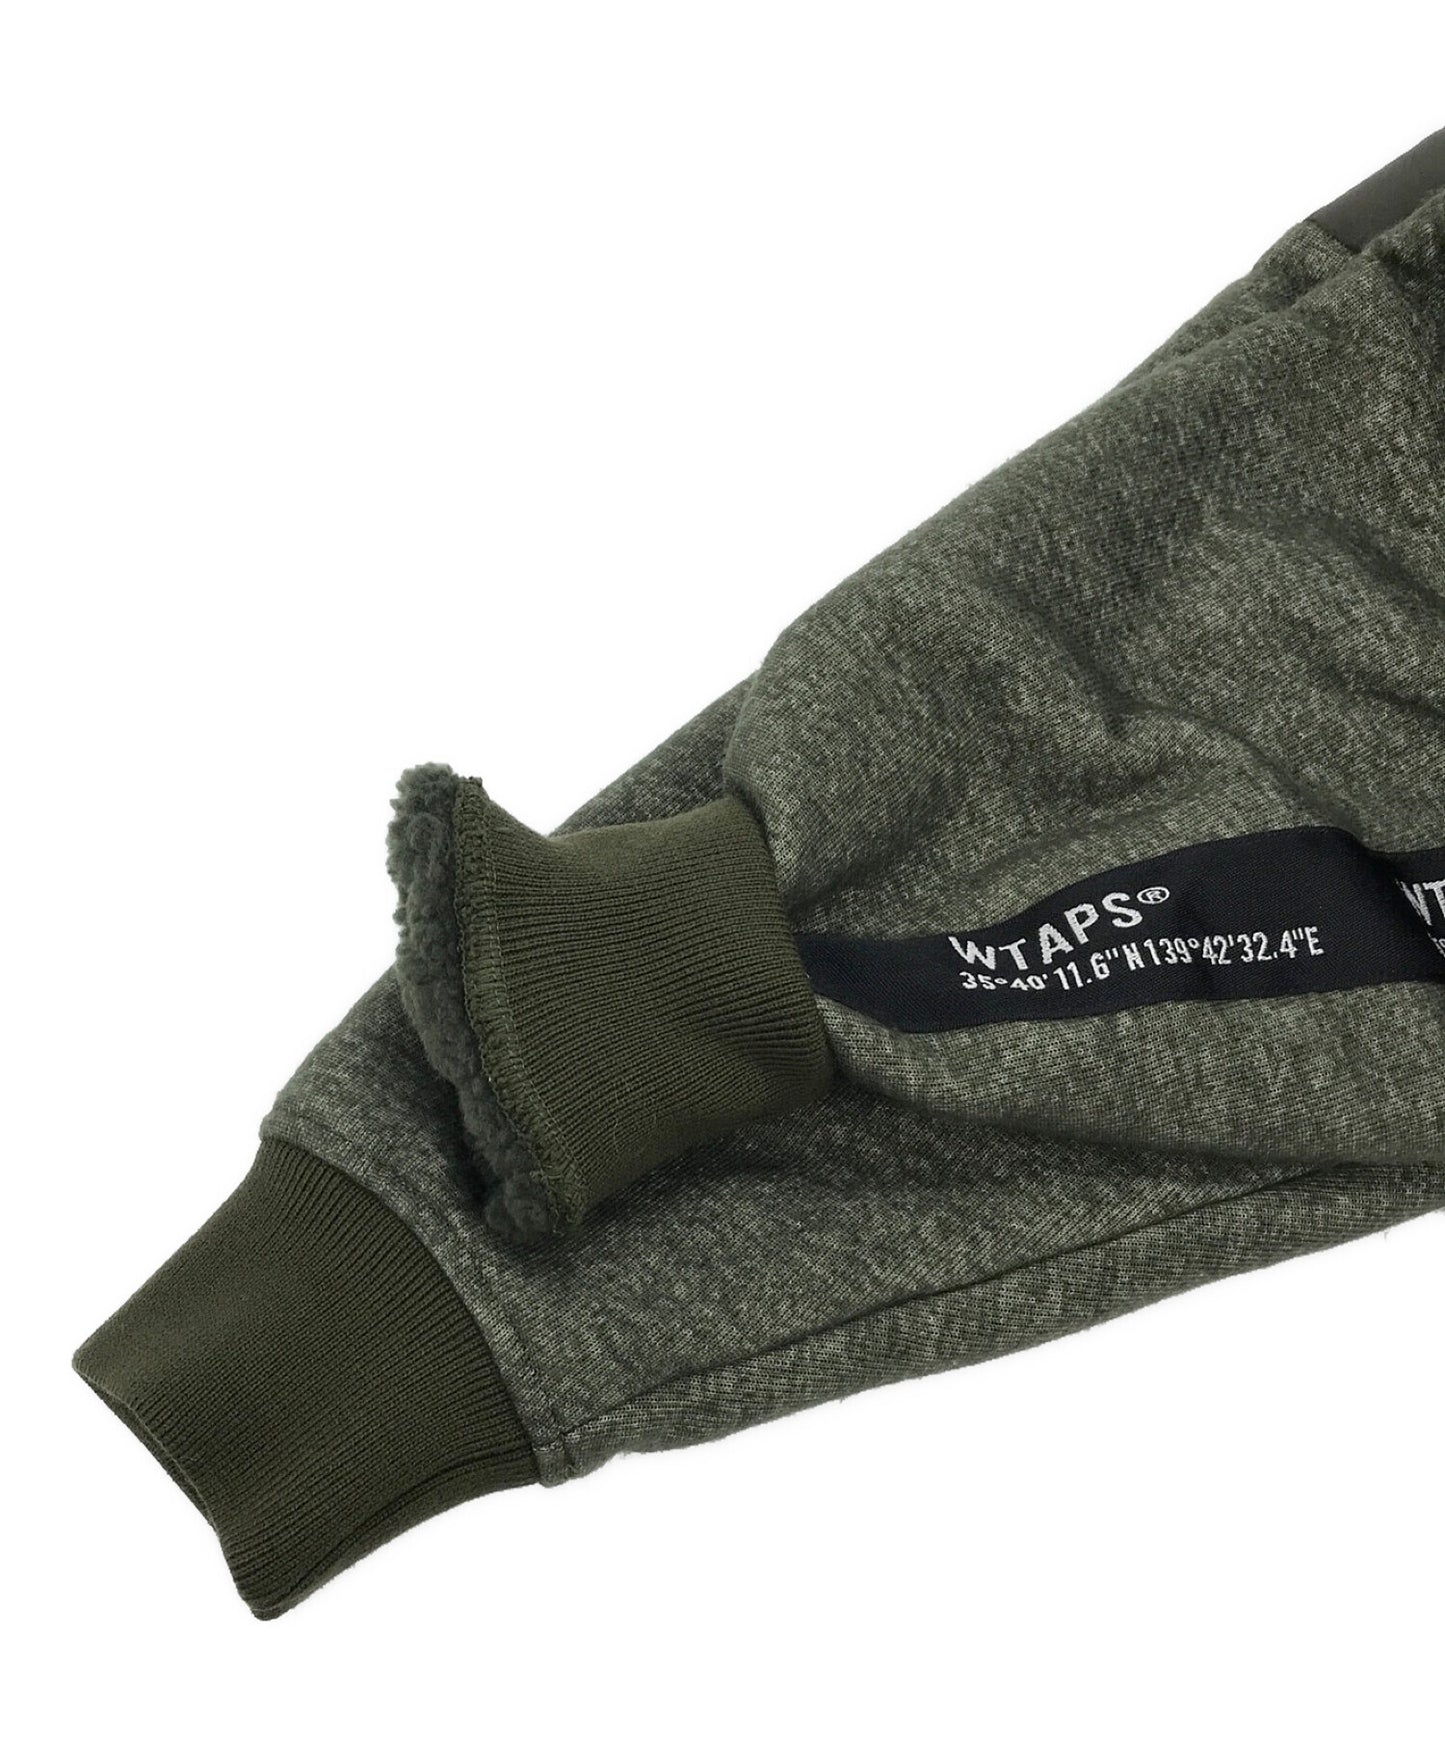 [Pre-owned] WTAPS boa jacket 222ATDT-JKM02